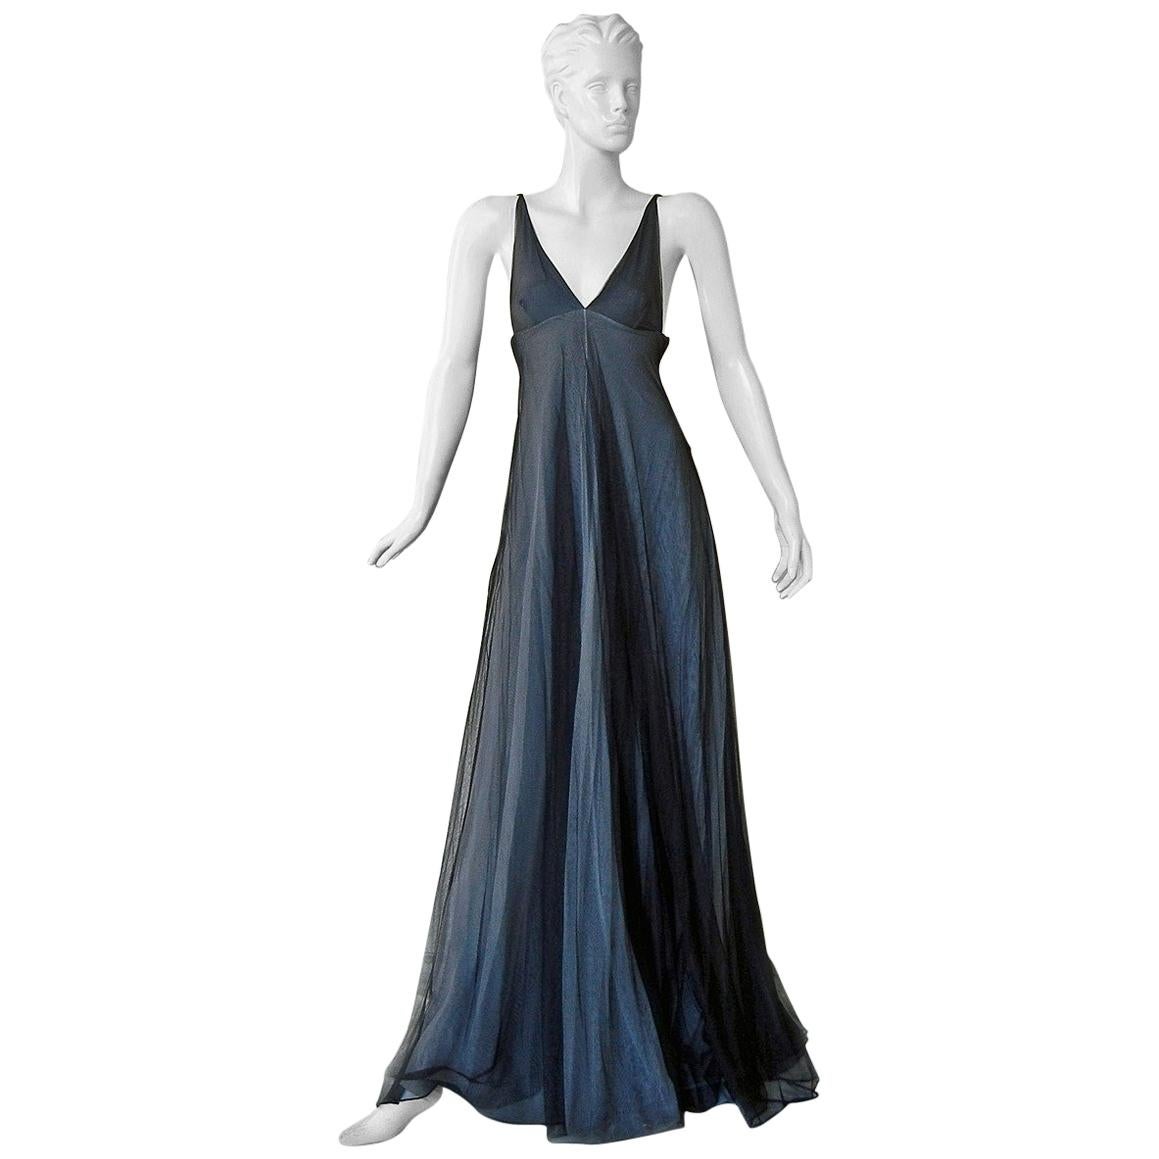 Gucci by Tom Ford Iconic 1998 Plunging Neckline Empire Style Dress Gown  